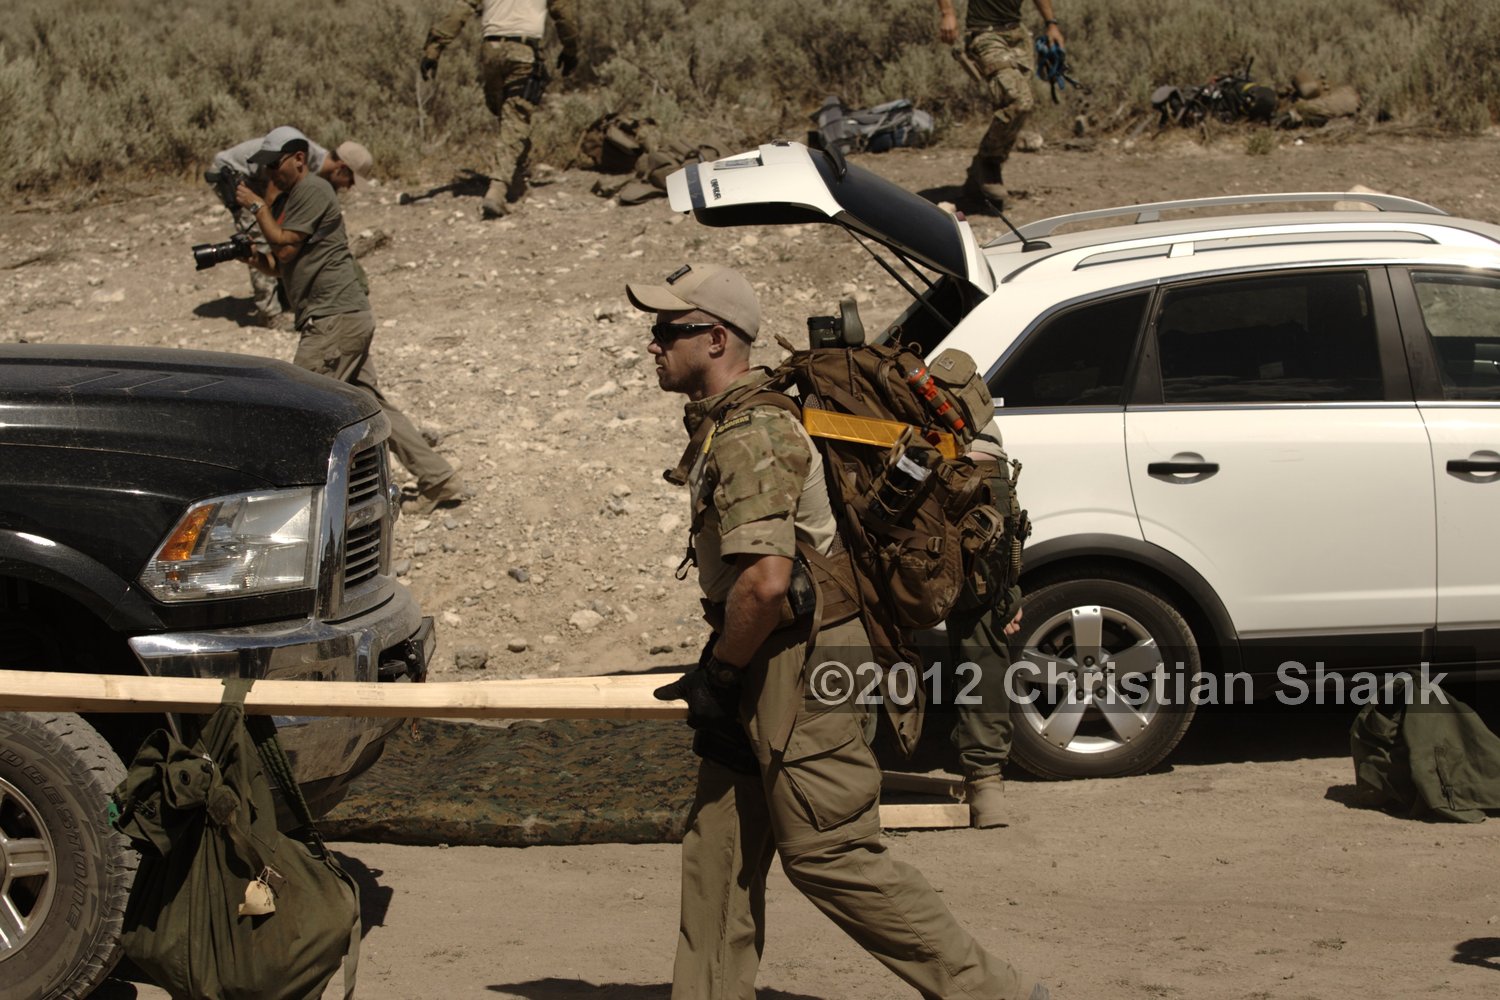 2012 Competition Dynamics 24-Hour Sniper Adventure Challenge, photos by Christian Shank
, photo 